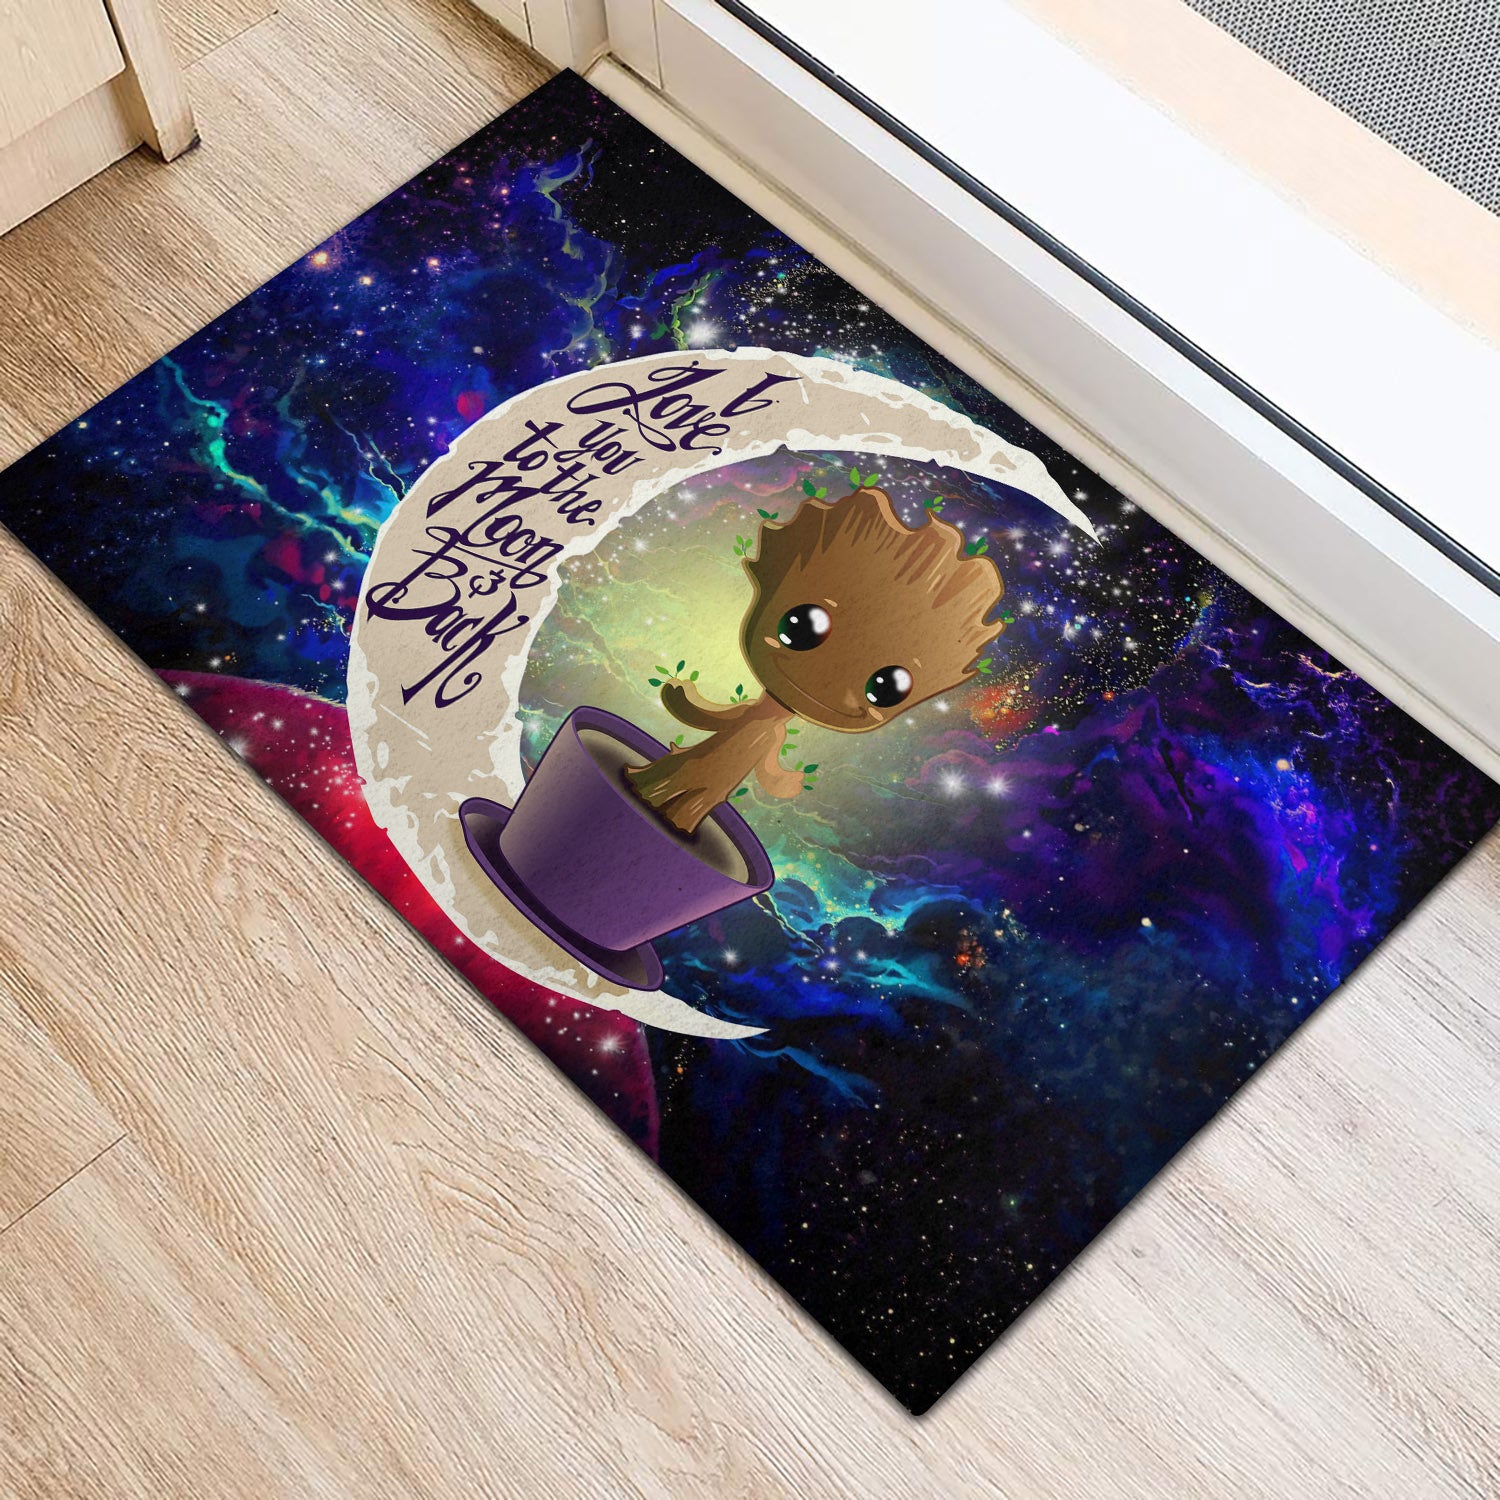 Baby Groot Love You To The Moon Galaxy Back Door Mats Home Decor